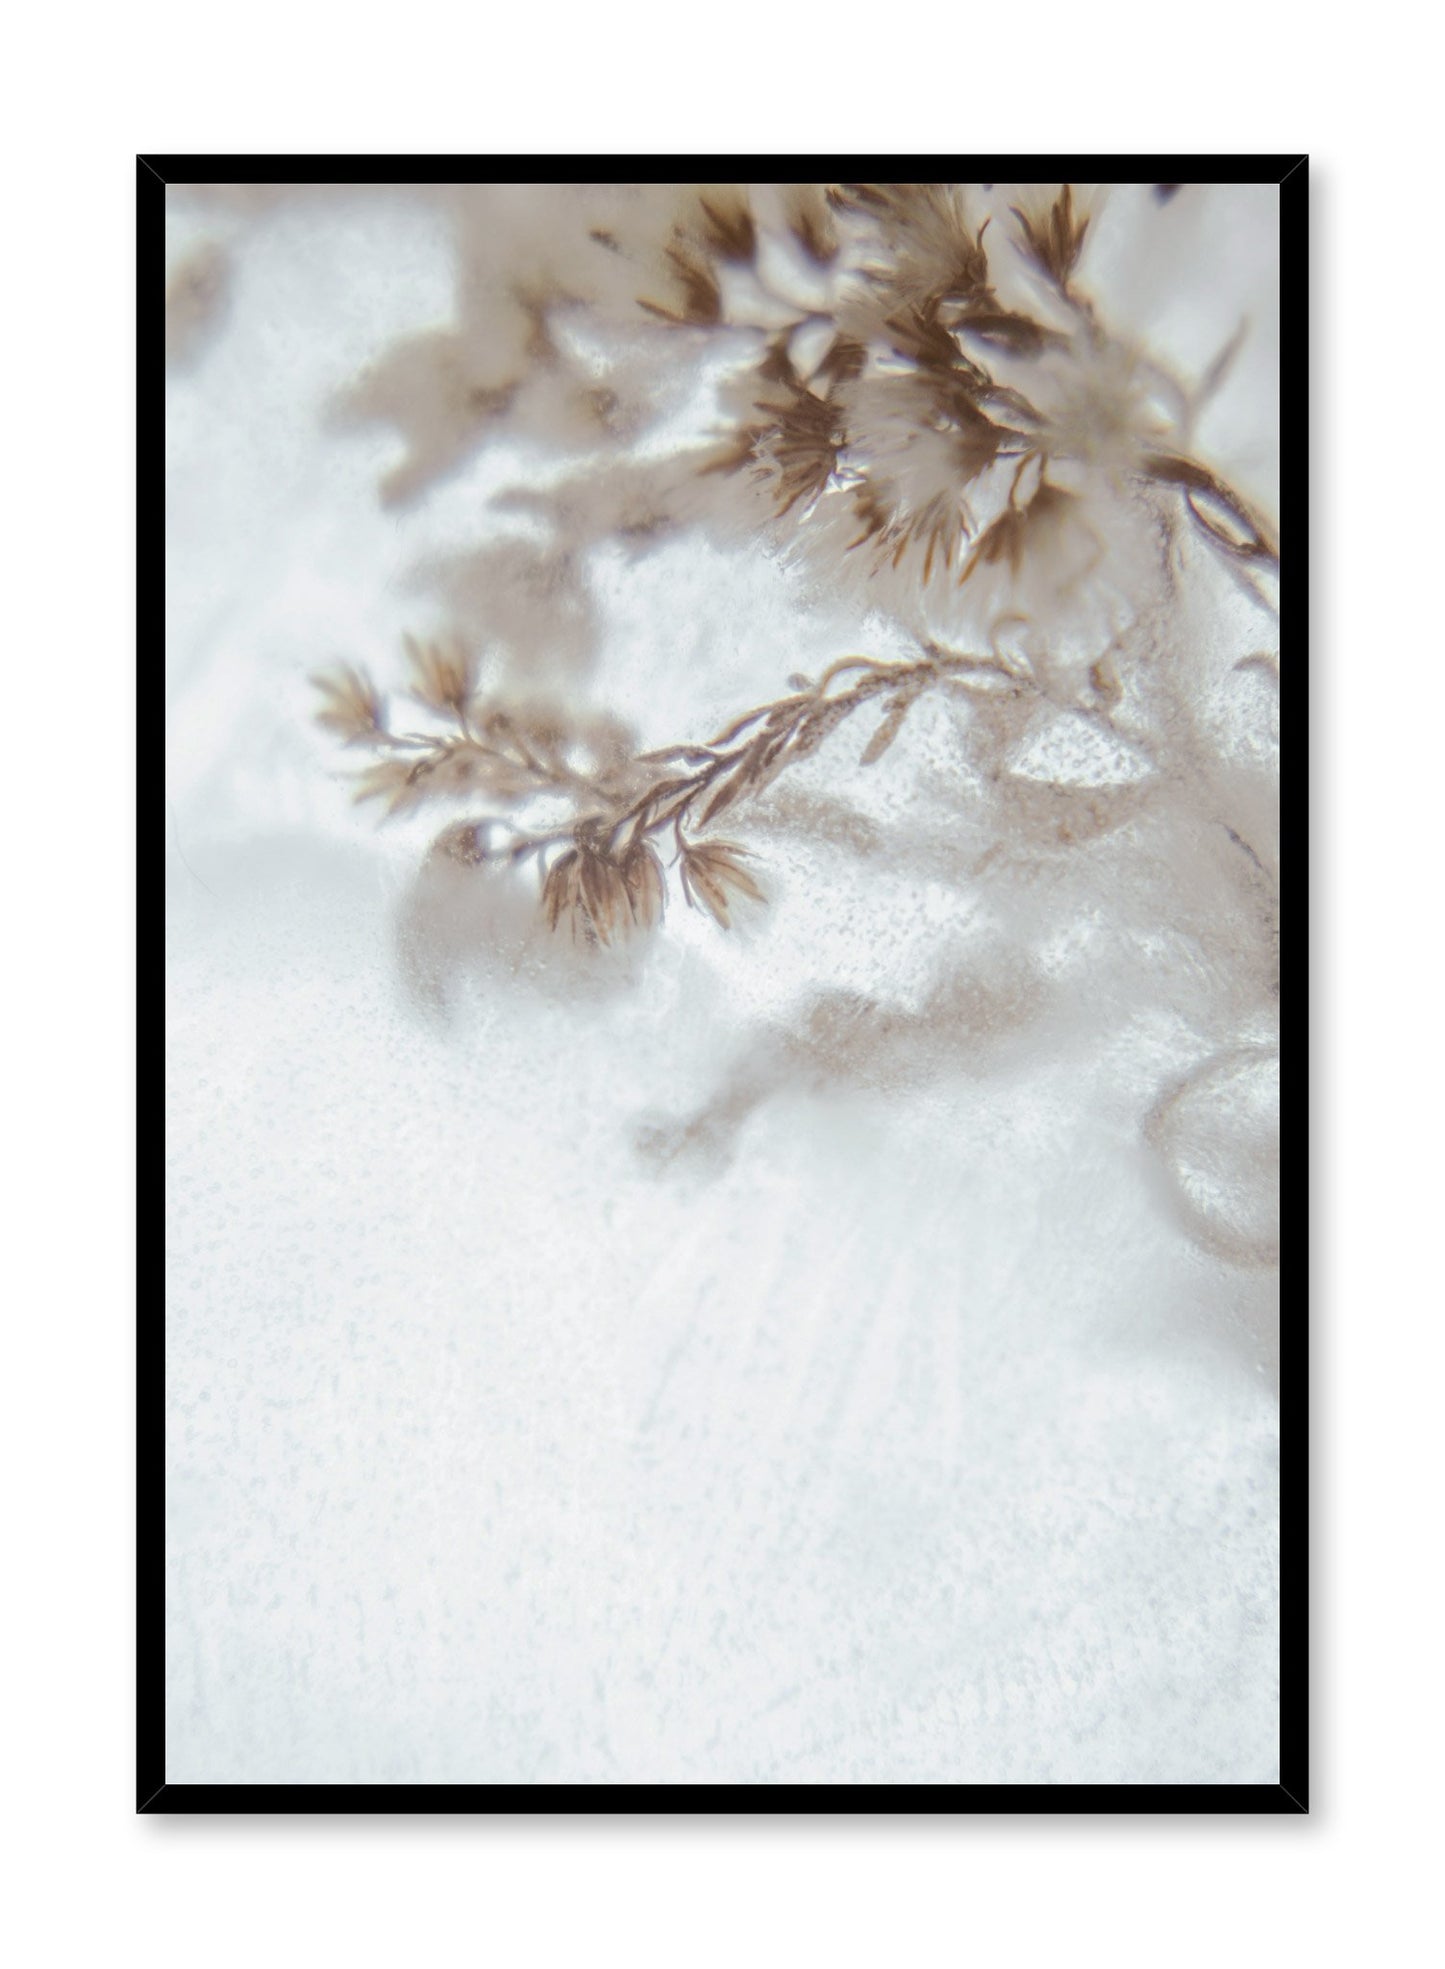 Modern minimalist botanical photography poster by Opposite Wall with Icy Petals